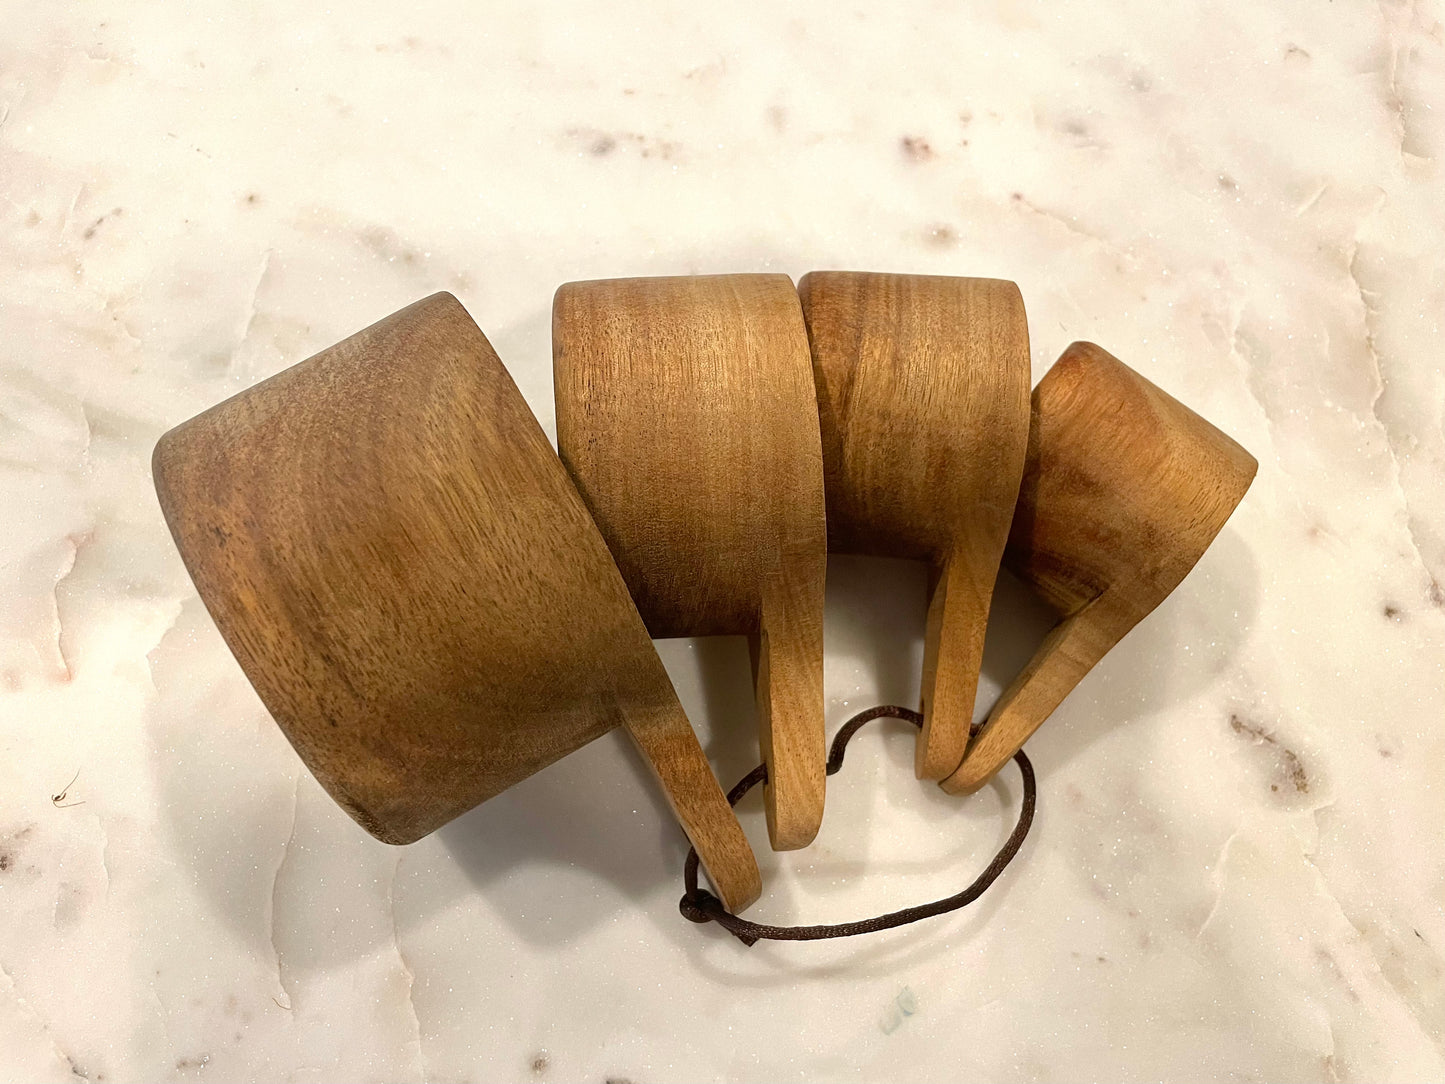 wood measuring cups, measuring cups, handmade cups, wood cups, baking measuring cup, baking accessories, dry measuring cups, dry ingredients cups, Mother's Day Gifts, Father's Day Gifts, Culinary Graduate Gifts, housewarming gifts, bakers gifts, bakers measuring set, christmas gifts,zero waste gifts